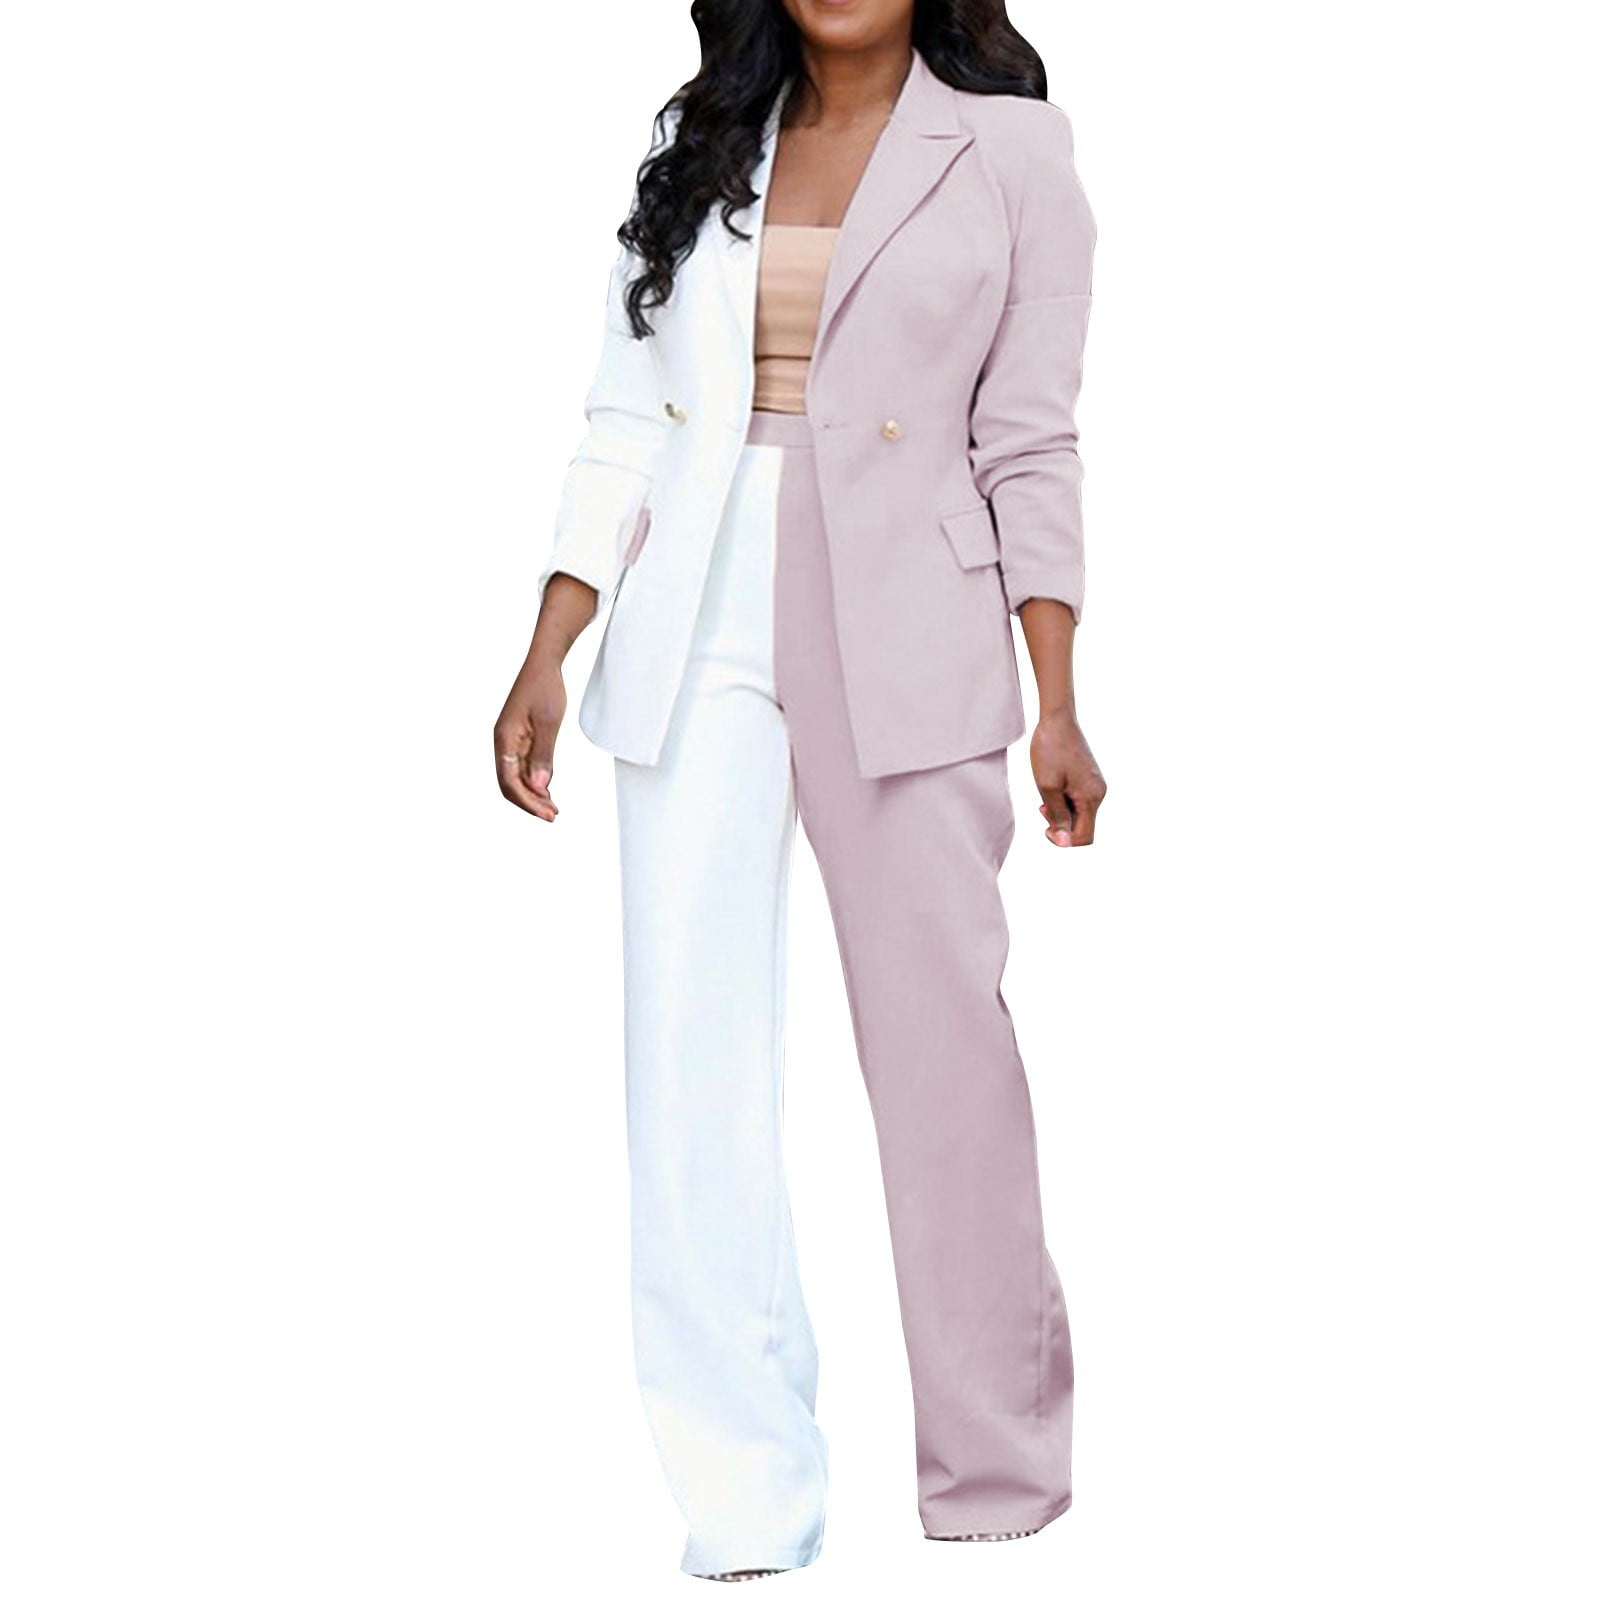 NKOOGH Dressy Wedding Pant Suits Two Piece for Women Pants Suit